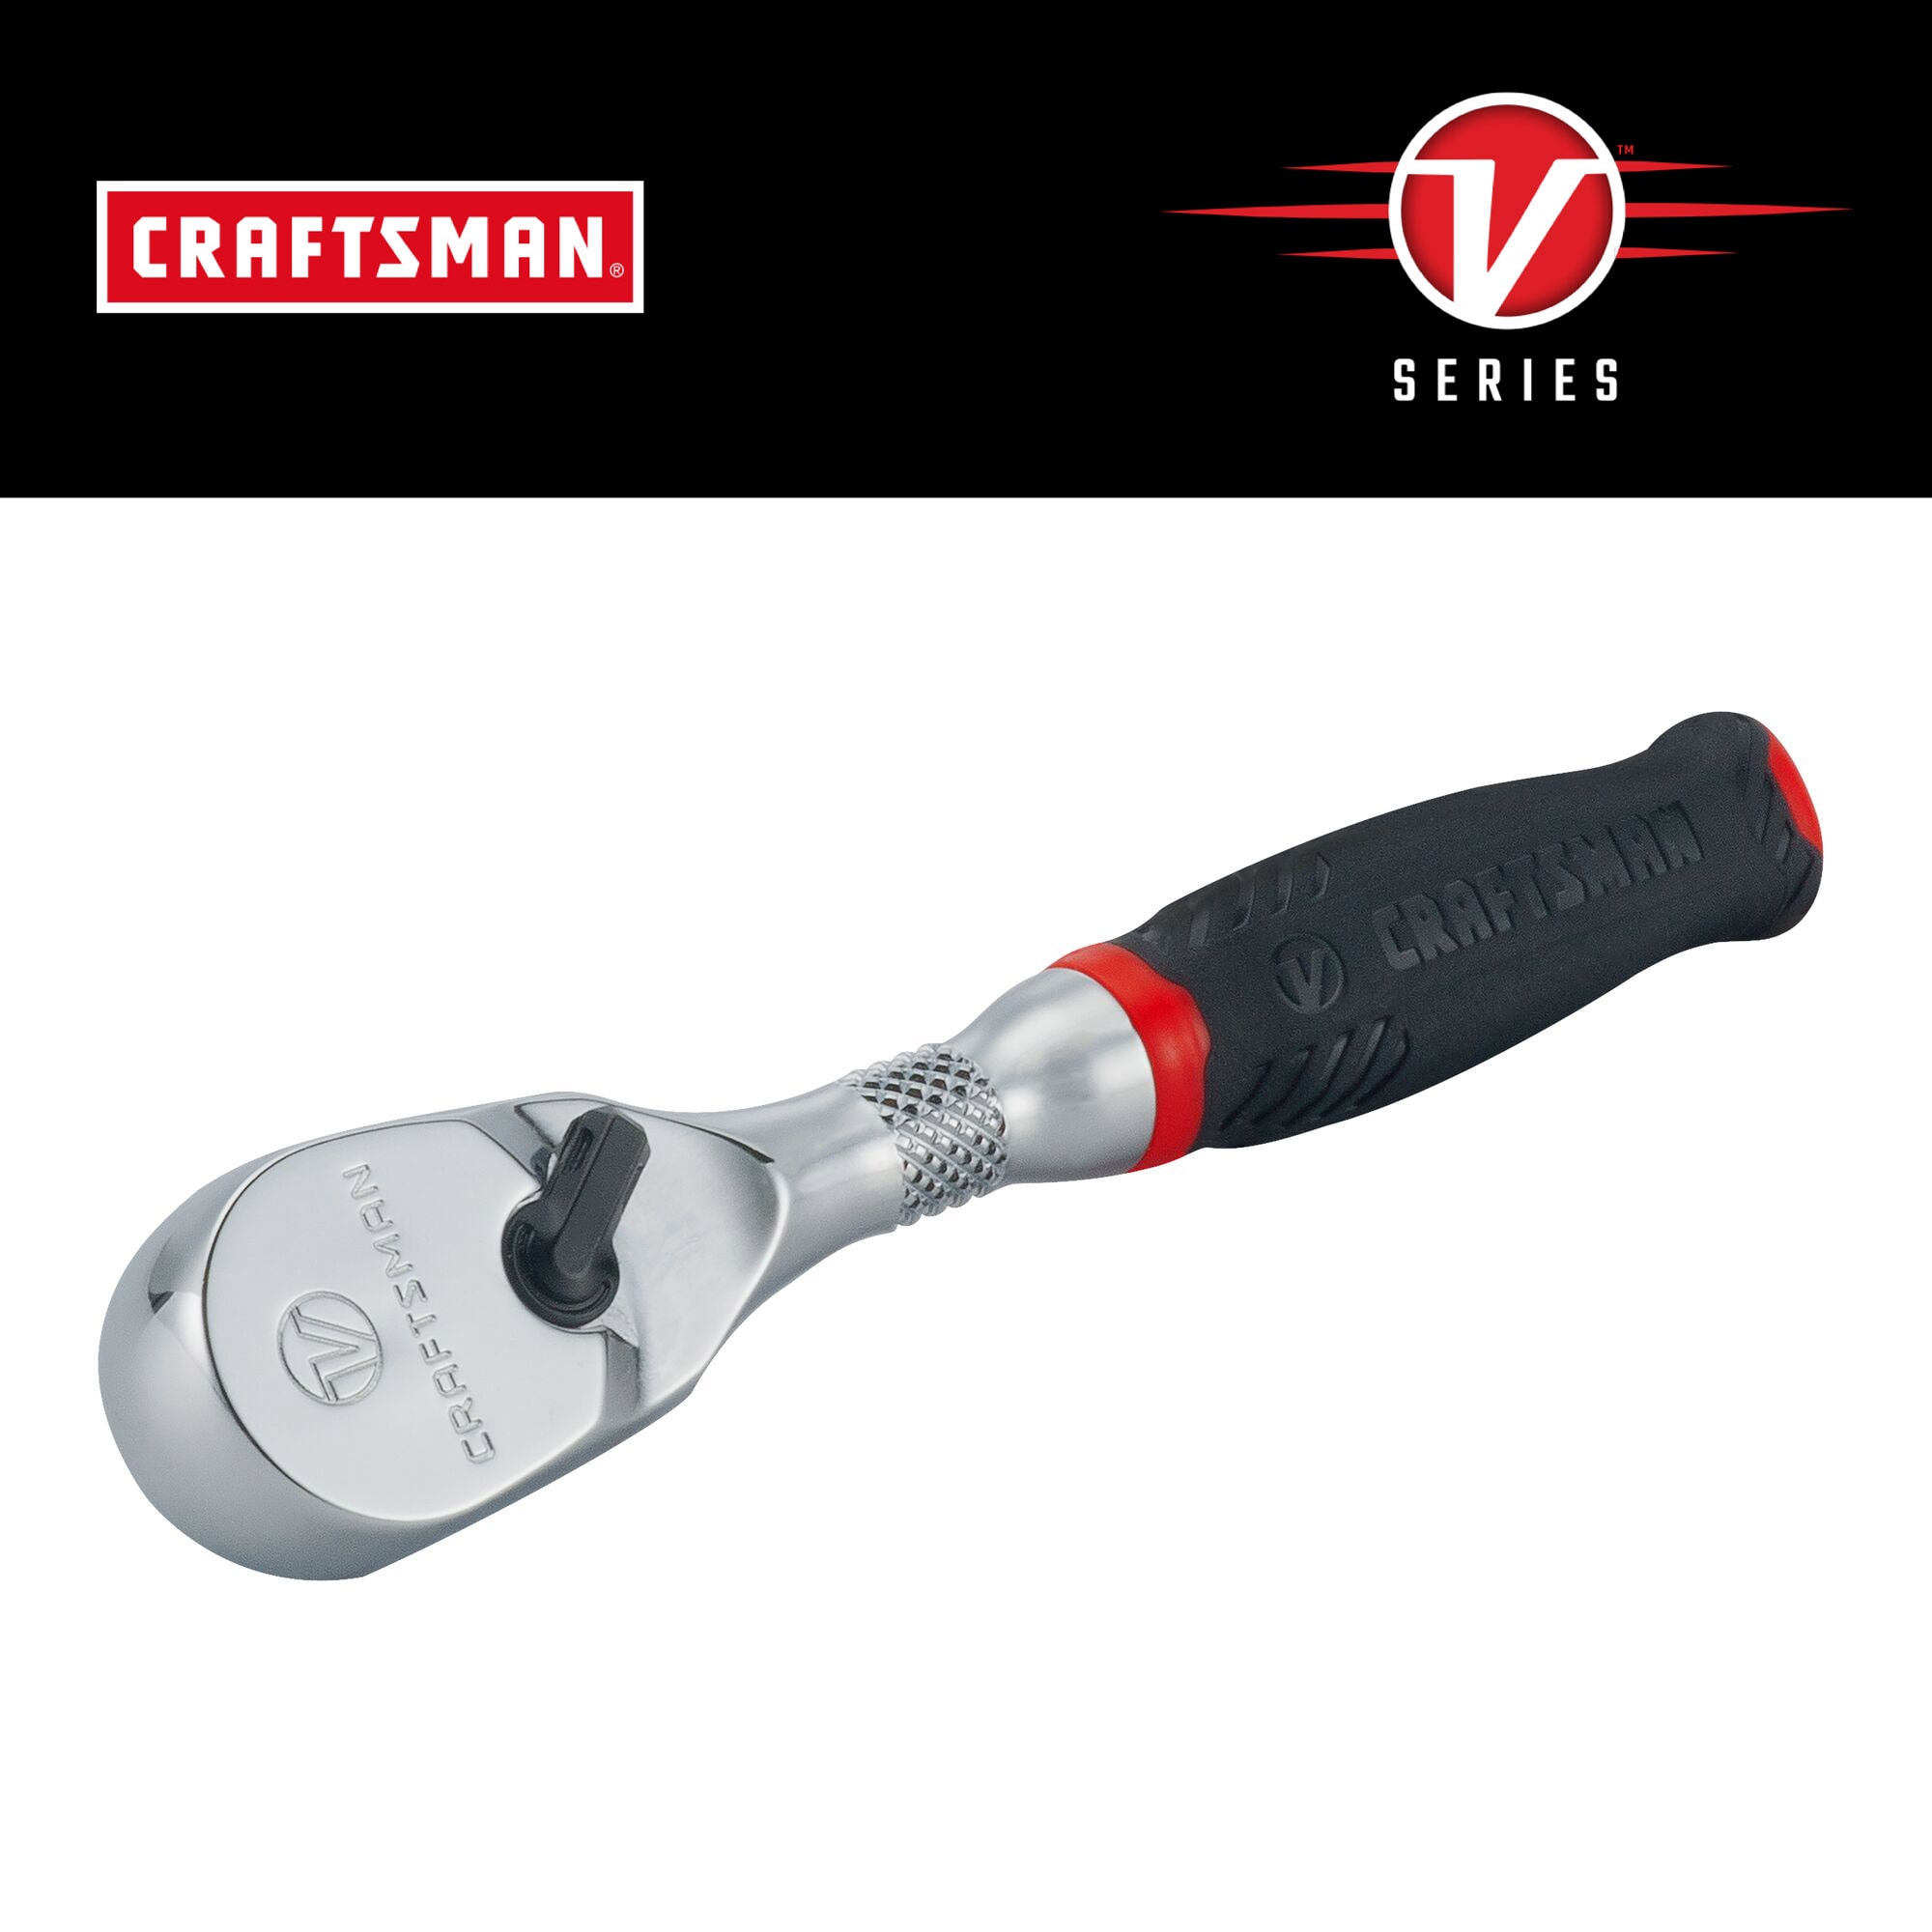 CRAFTSMAN V-Series 80-Tooth 1/4-in Drive Comfort Grip Handle